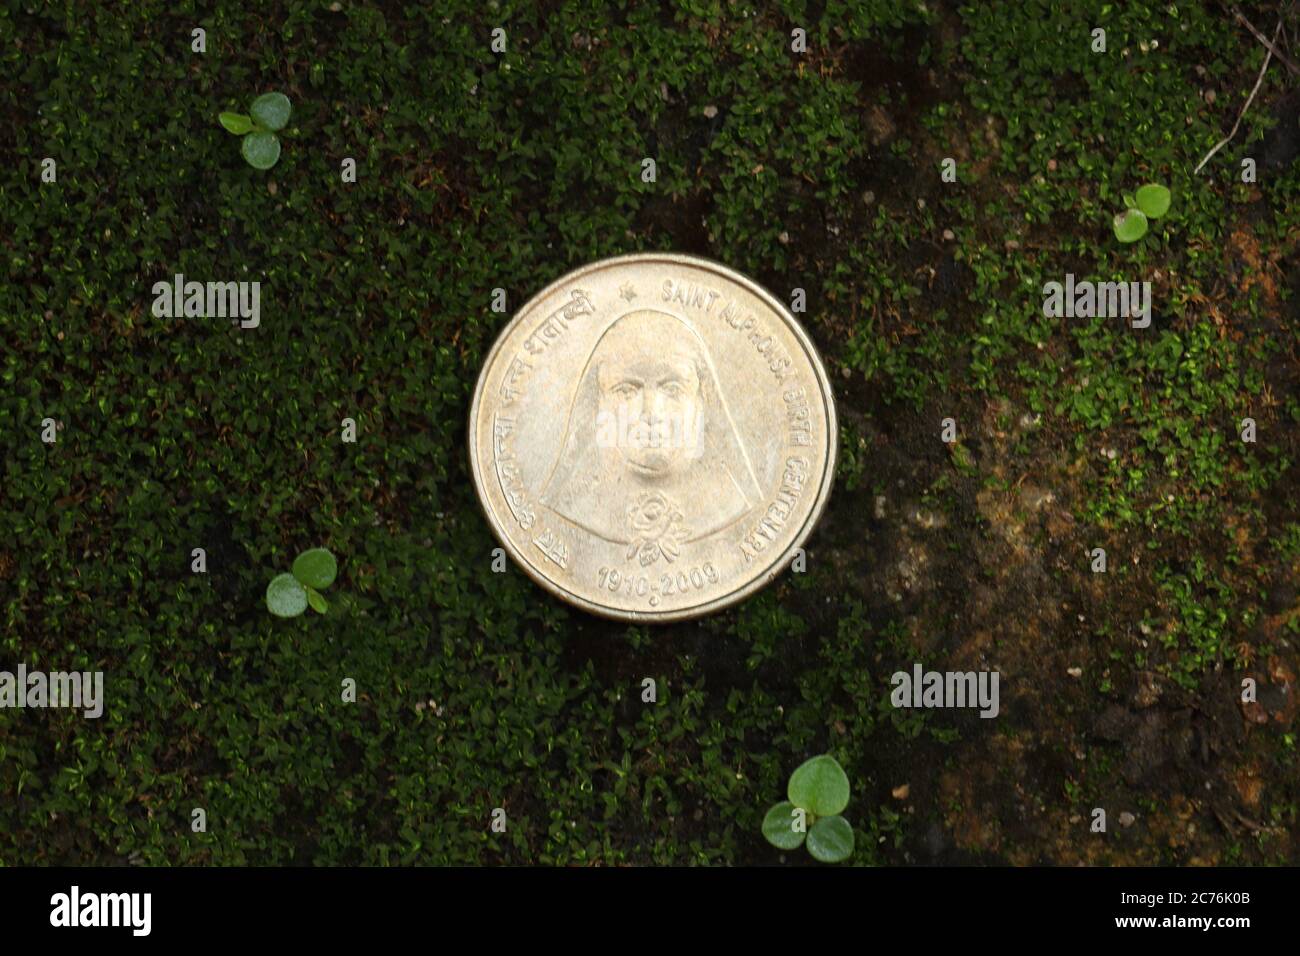 Indian coin Stock Photo